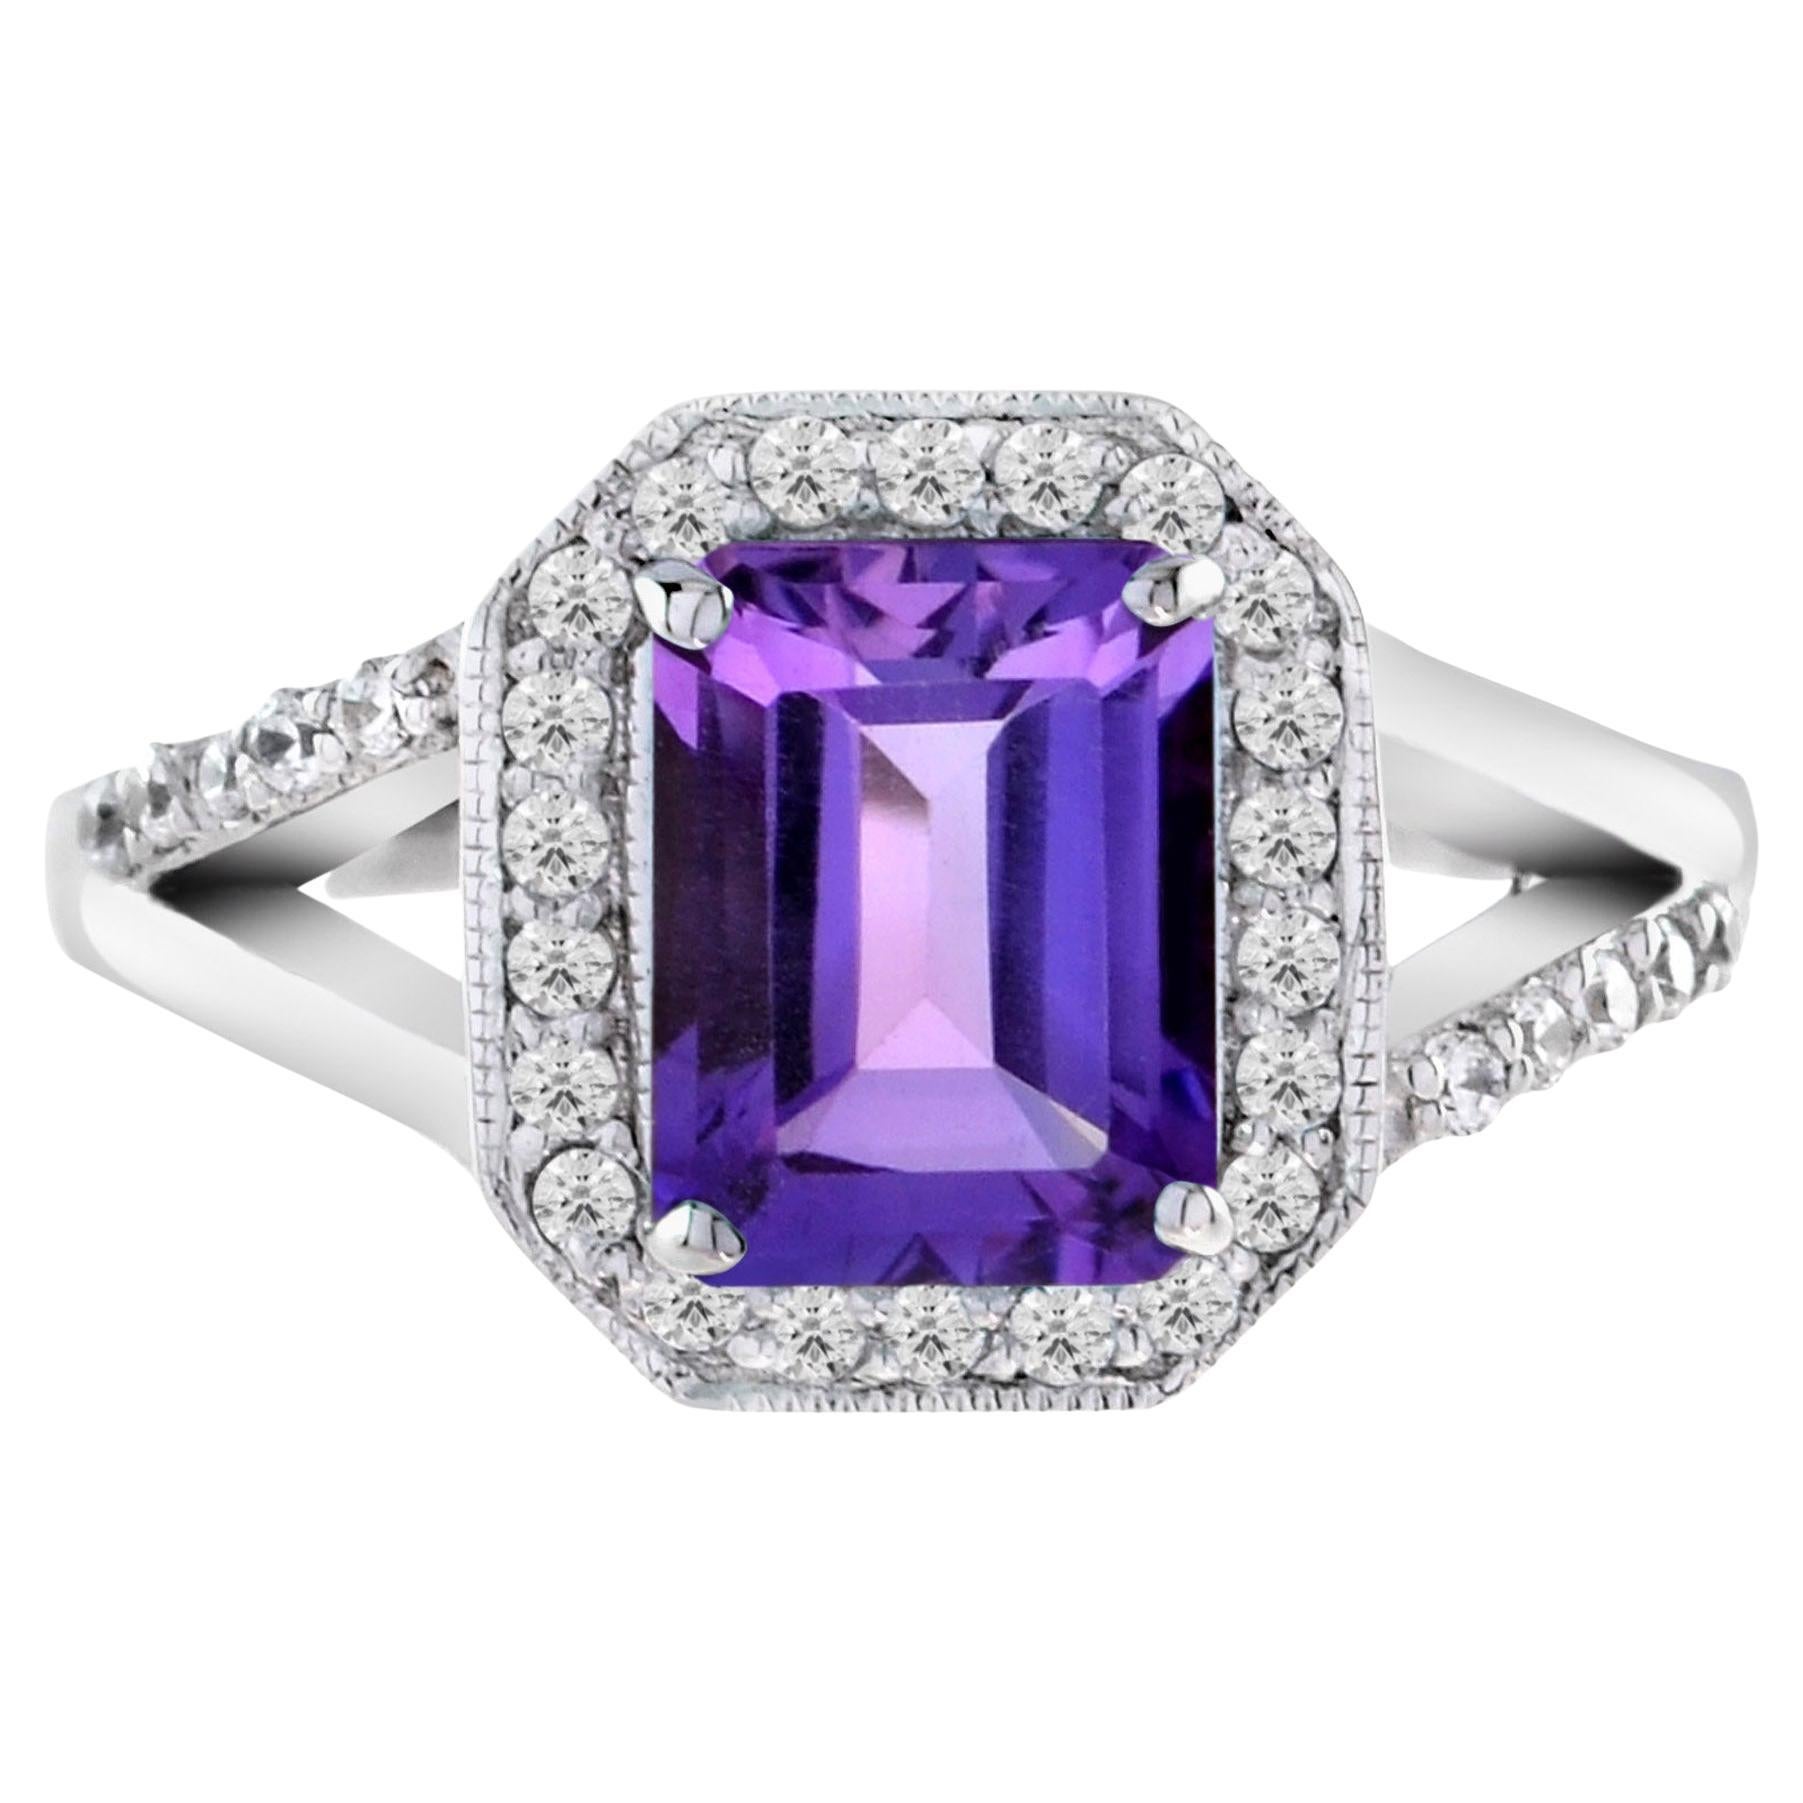 For Sale:  Emerald Cut Amethyst and Diamond Split Shank Engagement Ring in 18K White Gold